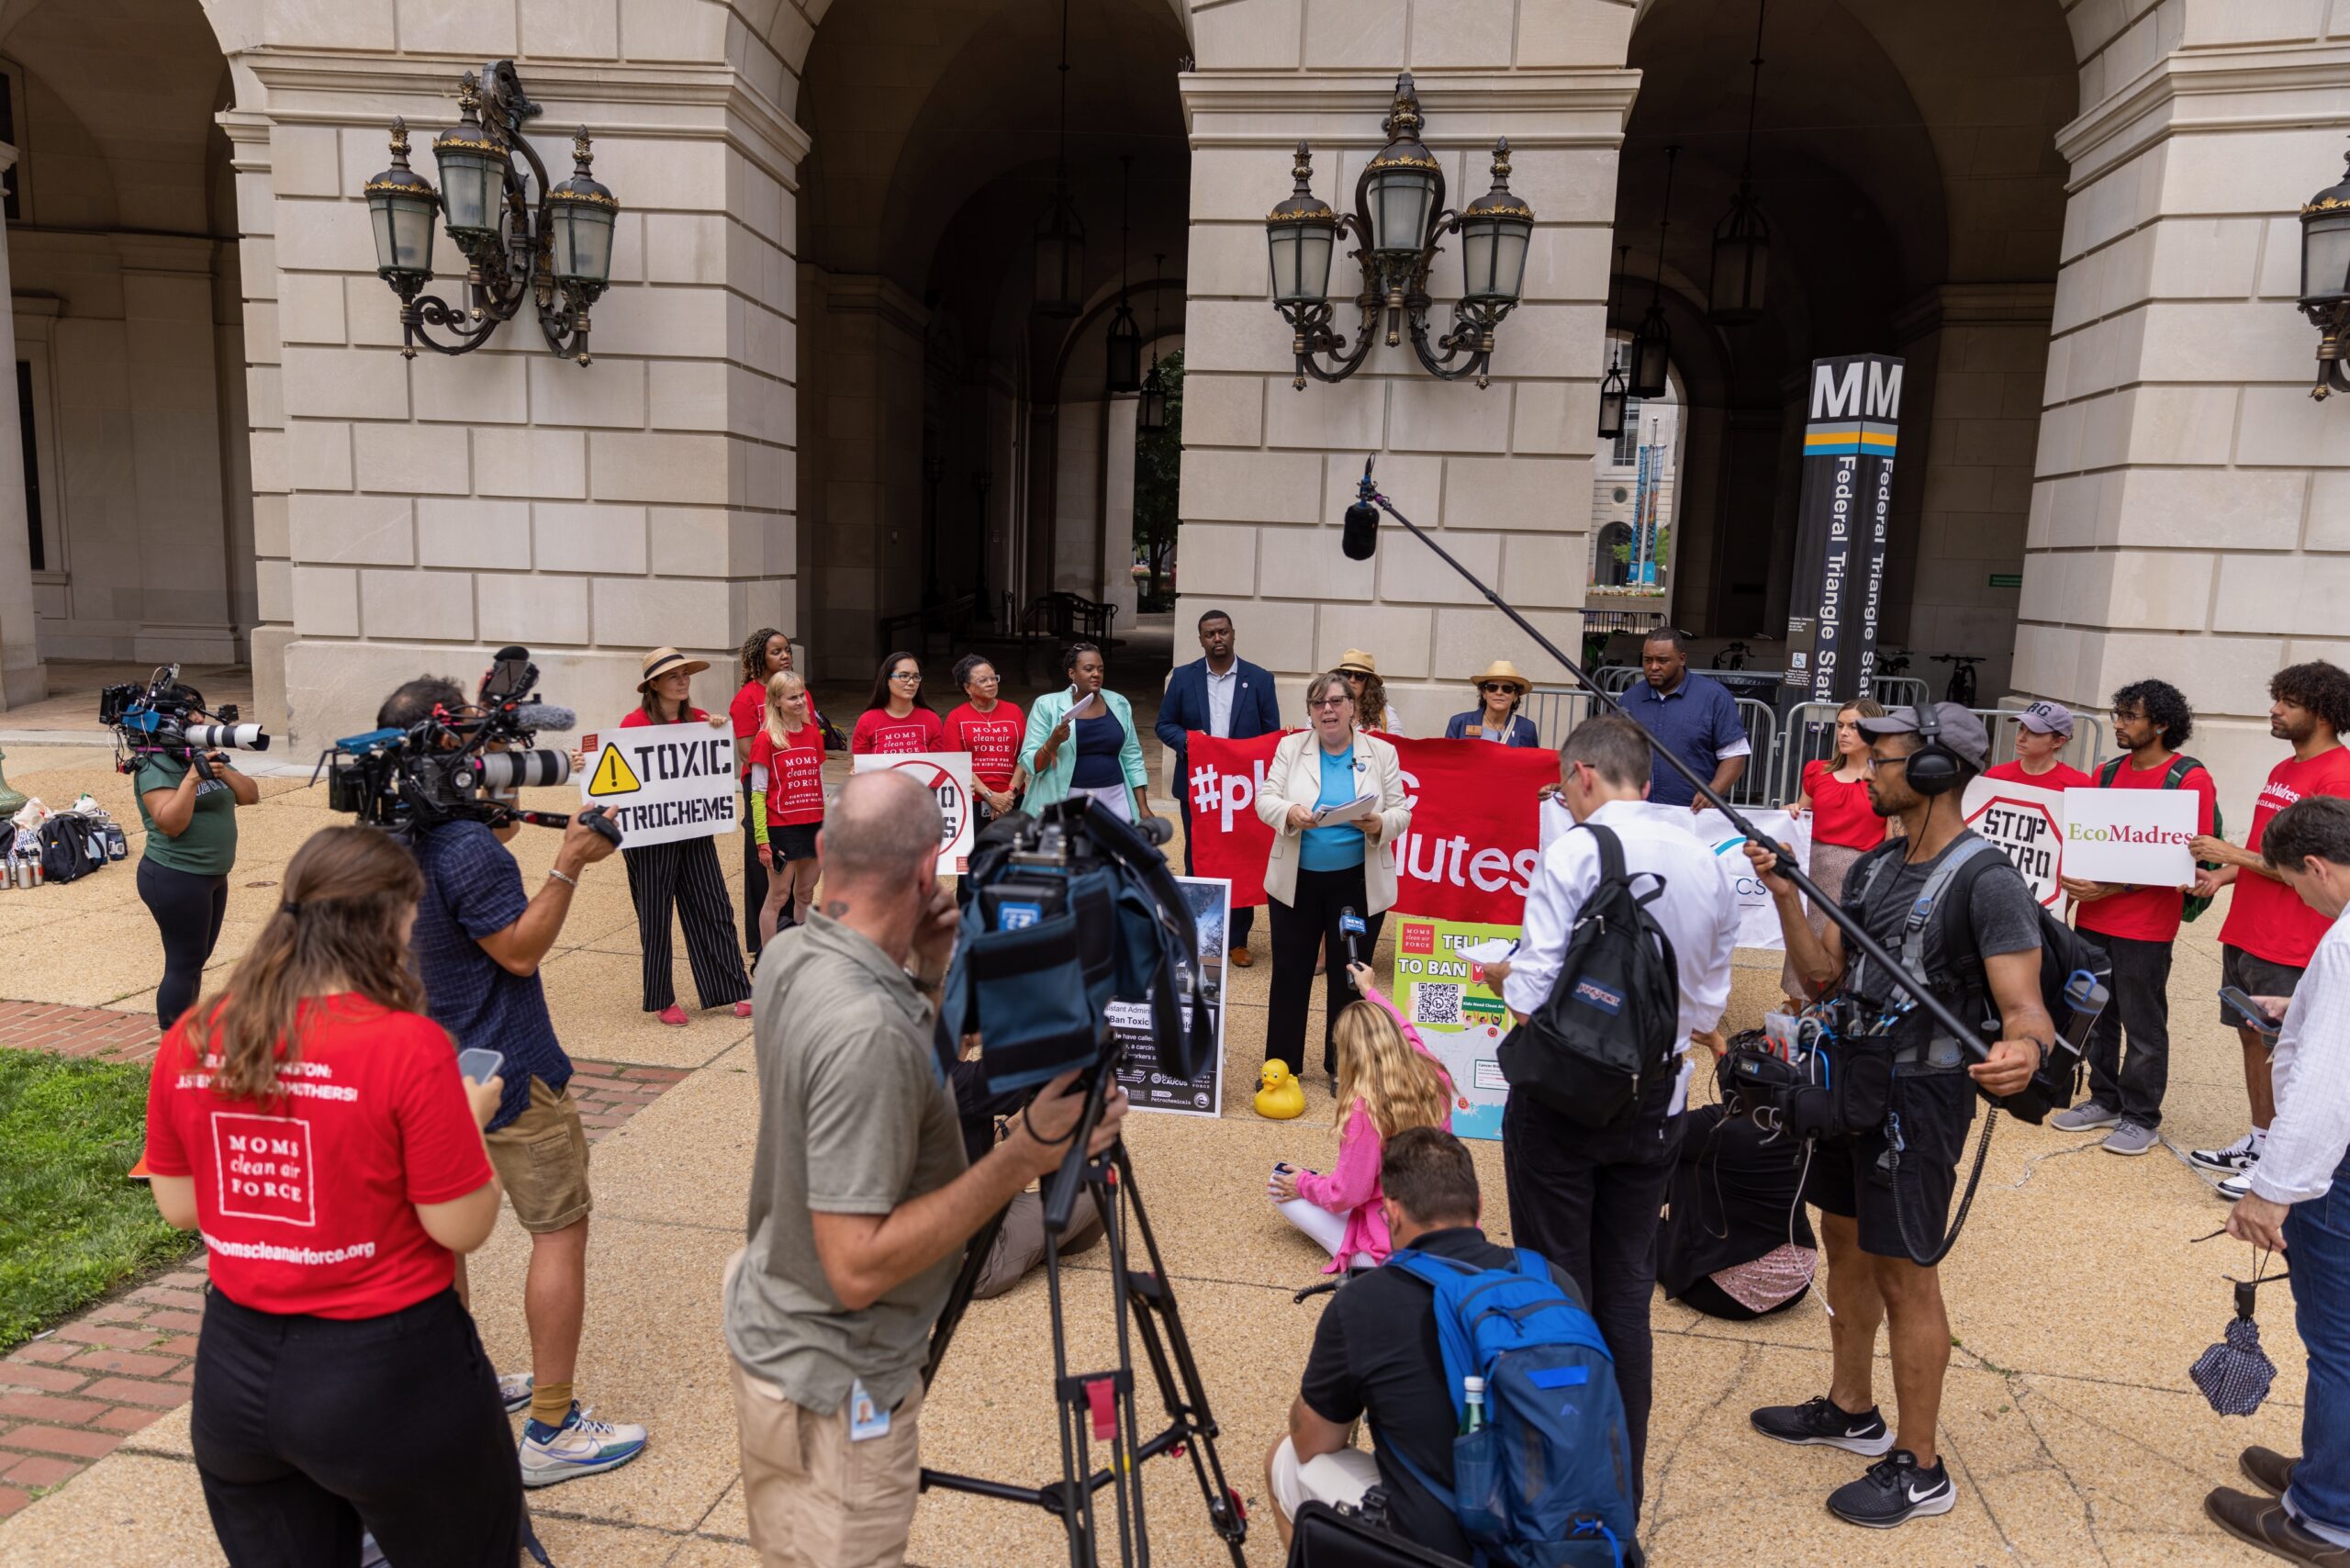 People in front of the cameras at the EPA building